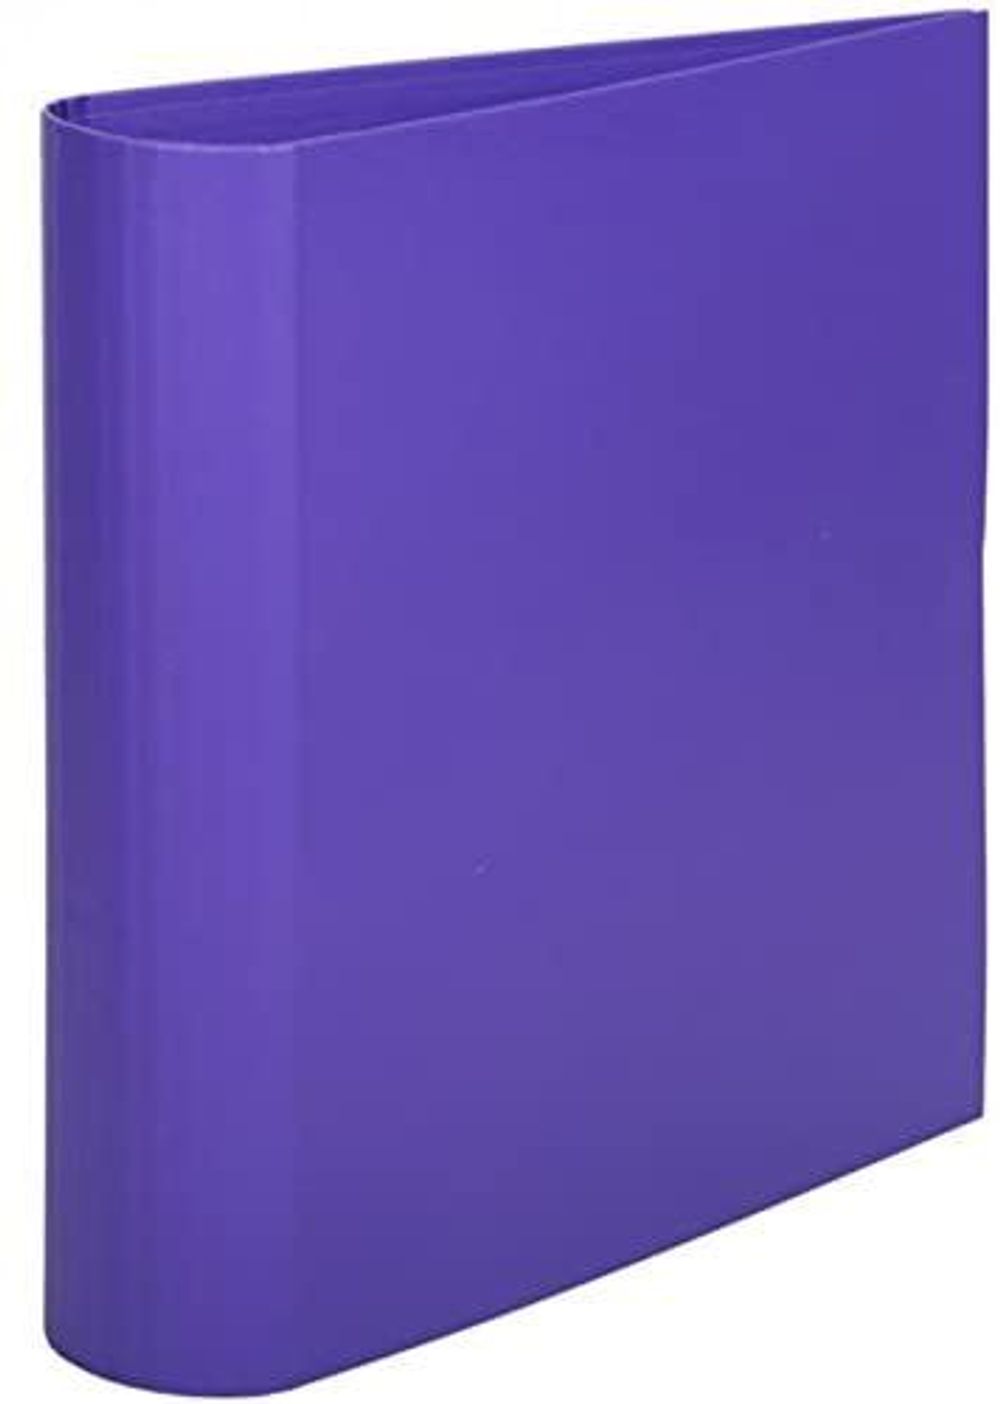 A4 Large 80mm Lever Arch File Folder Stylish Design with Ring Binder and Metal Finger Pull